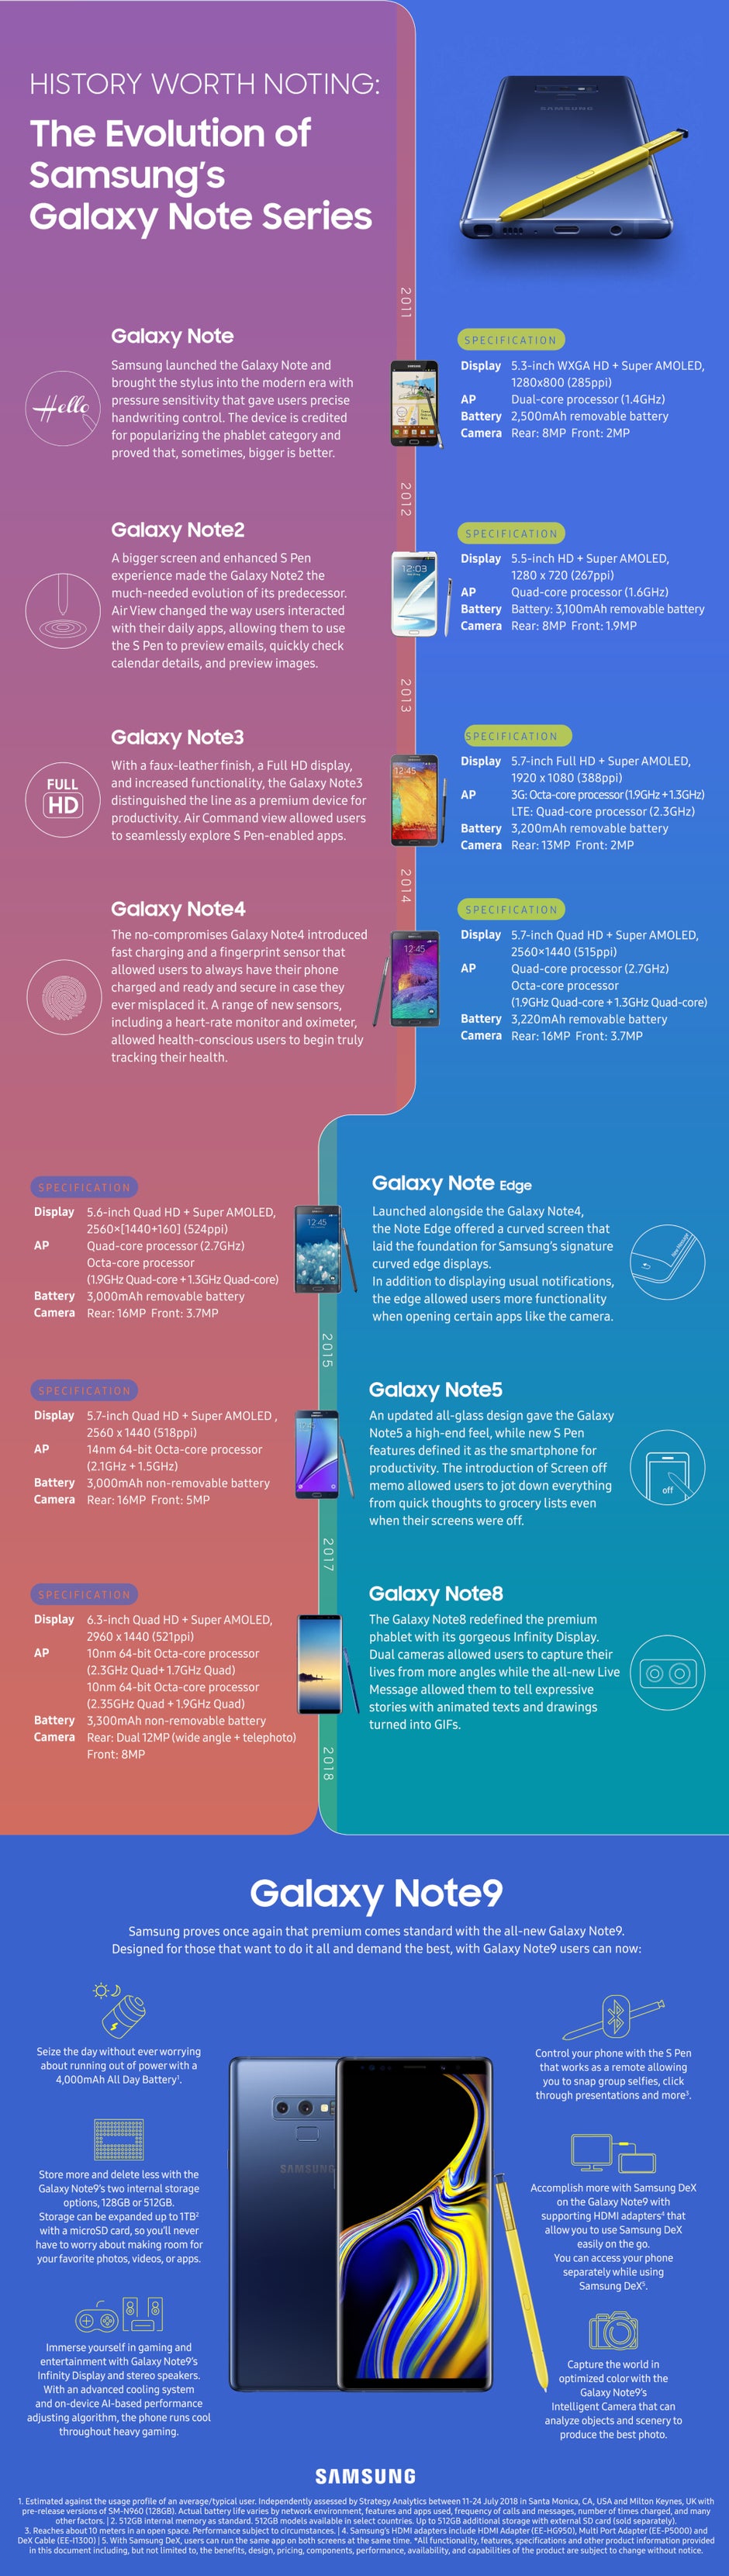 History of the Note infographic - Samsung celebrates the history of the Note. Forgets about the Note 7